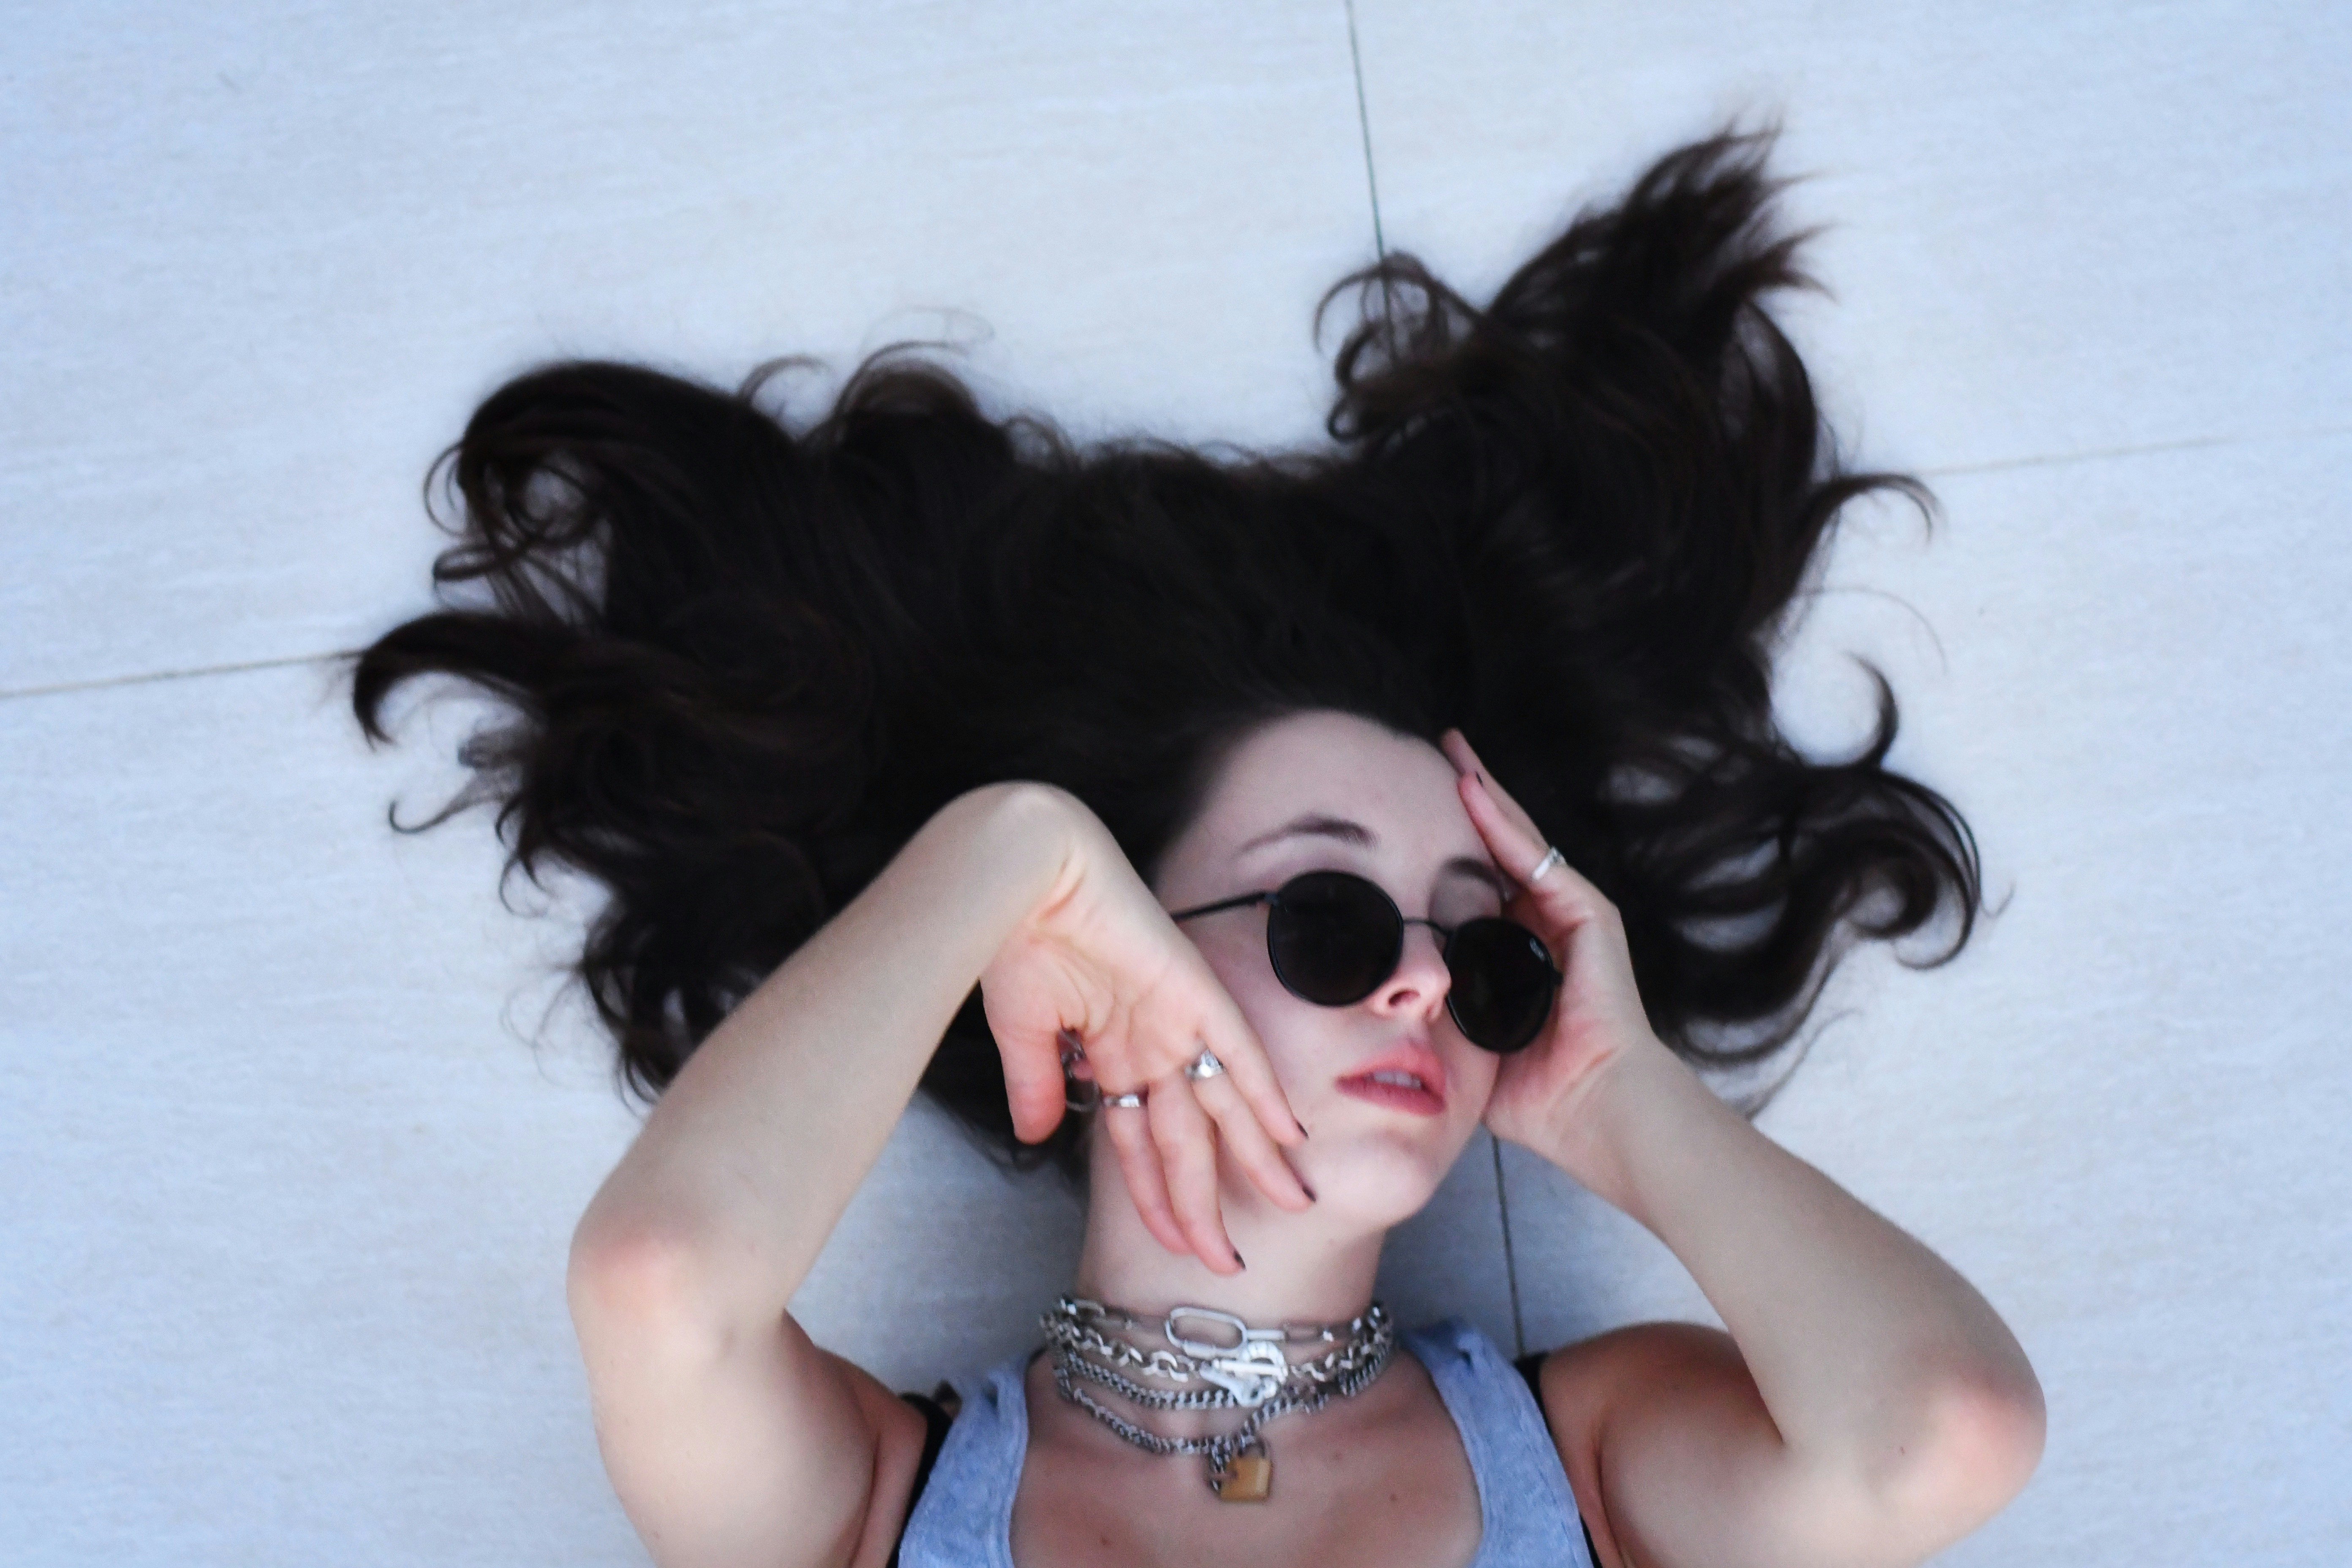 A girl laying on the ground with wavy hair.